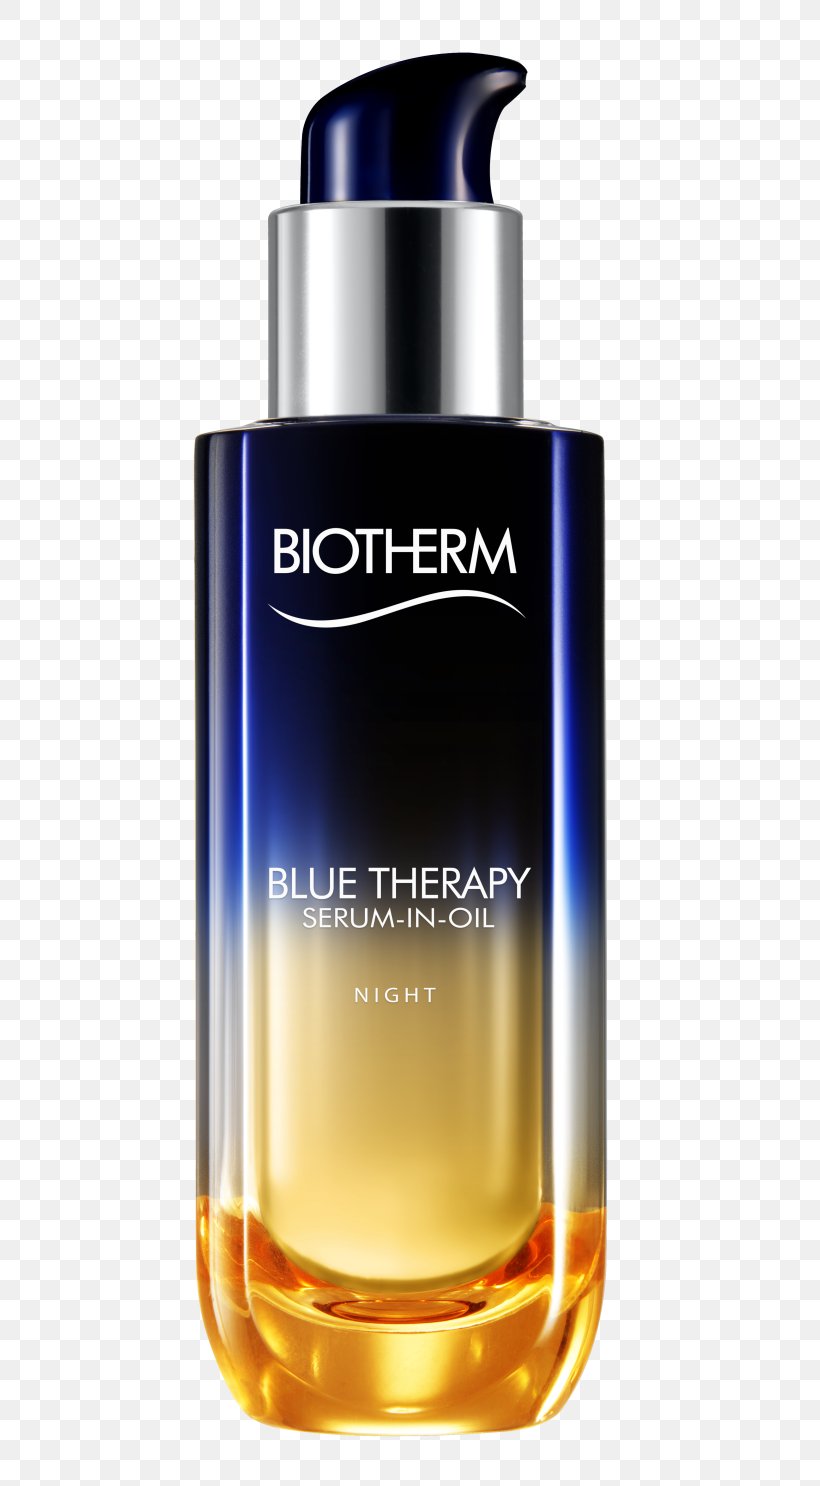 Biotherm Blue Therapy Serum-In-Oil Night Anti-aging Cream Biotherm Blue Therapy Serum In Oil 30ml Cosmetics Skin, PNG, 537x1486px, Antiaging Cream, Biotherm, Cosmetics, Cream, Liquid Download Free